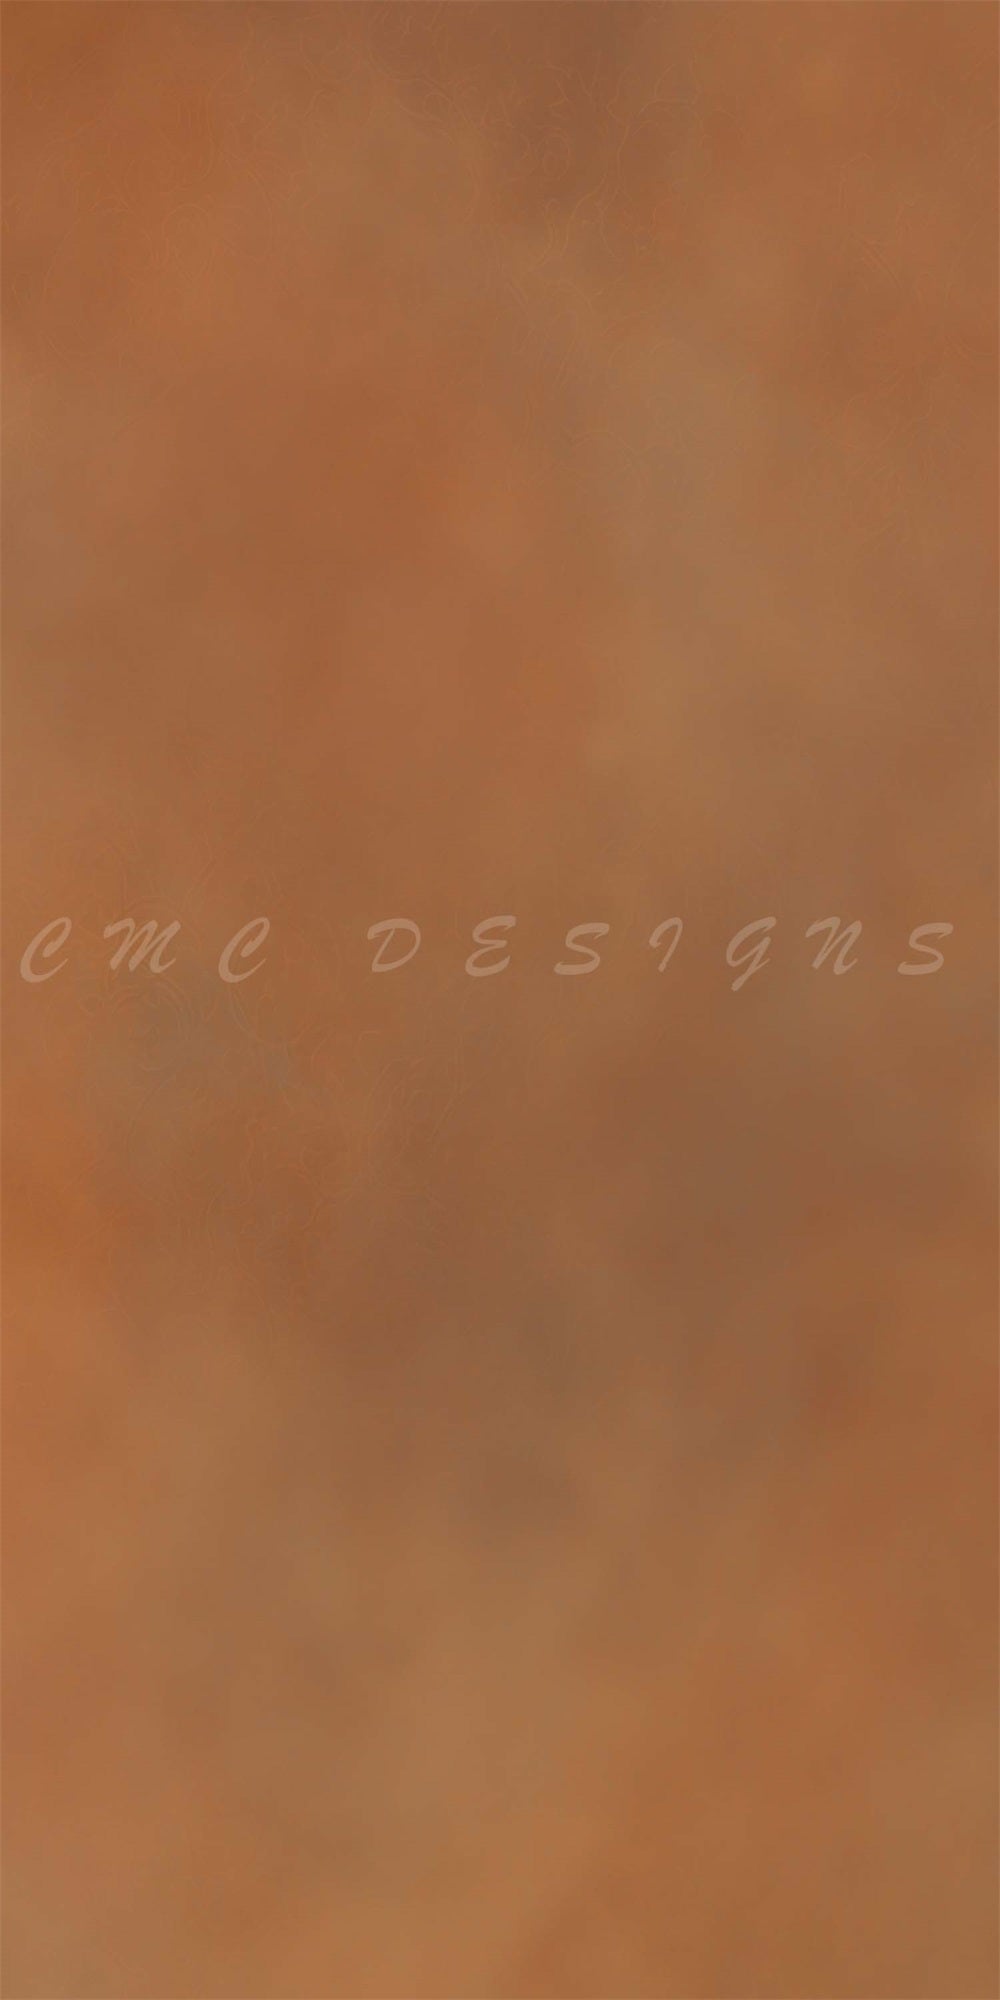 Kate Sweep Abstract Orange Brown Pumpkin Spice Gradient Texture Backdrop Designed by Candice Compton